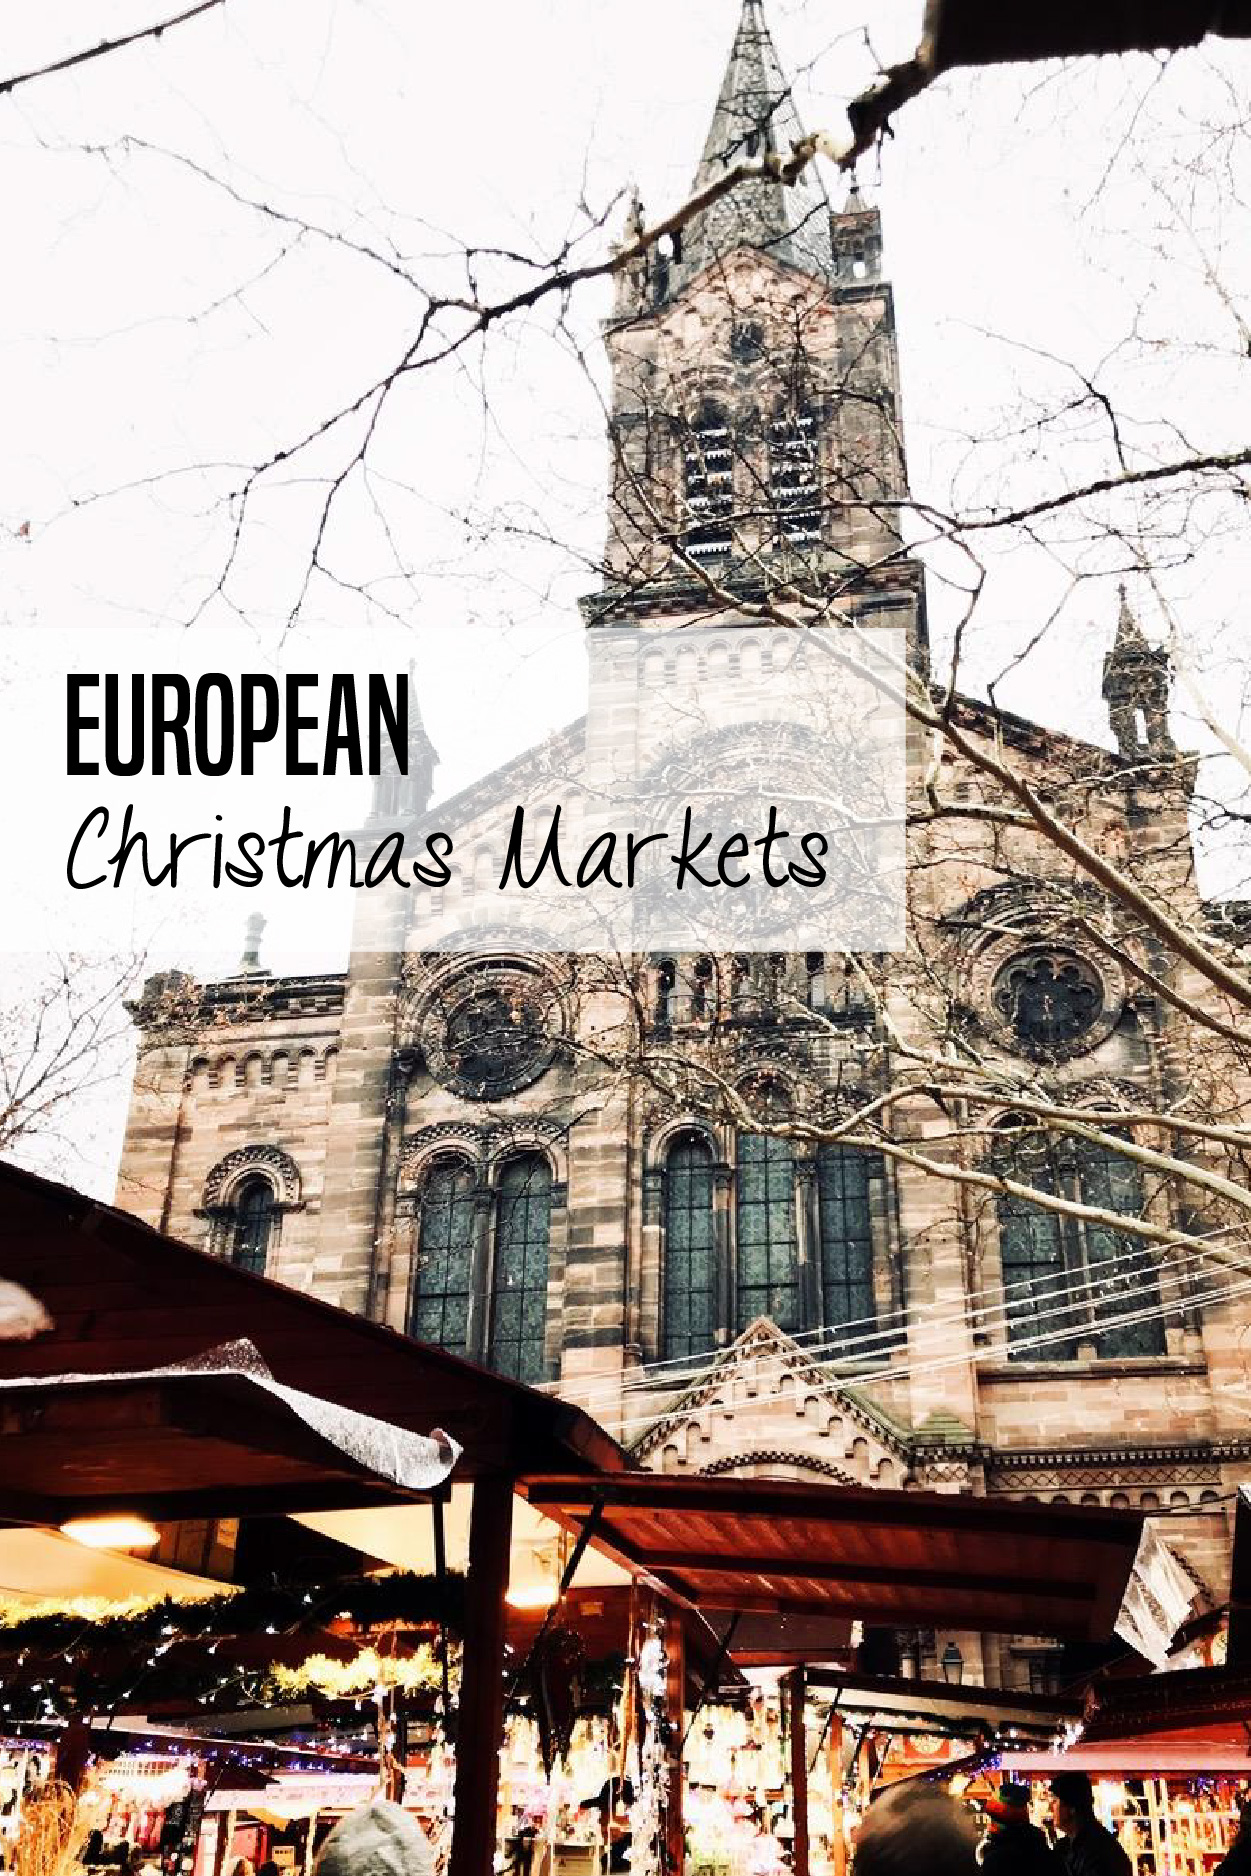 Tips for visiting the European Christmas markets with kids from Sarah Wilson of the Family Backpack. #vacationmavens #podcast #europe #familytravel #christmasmarkets #christmastravel #holidaytravel